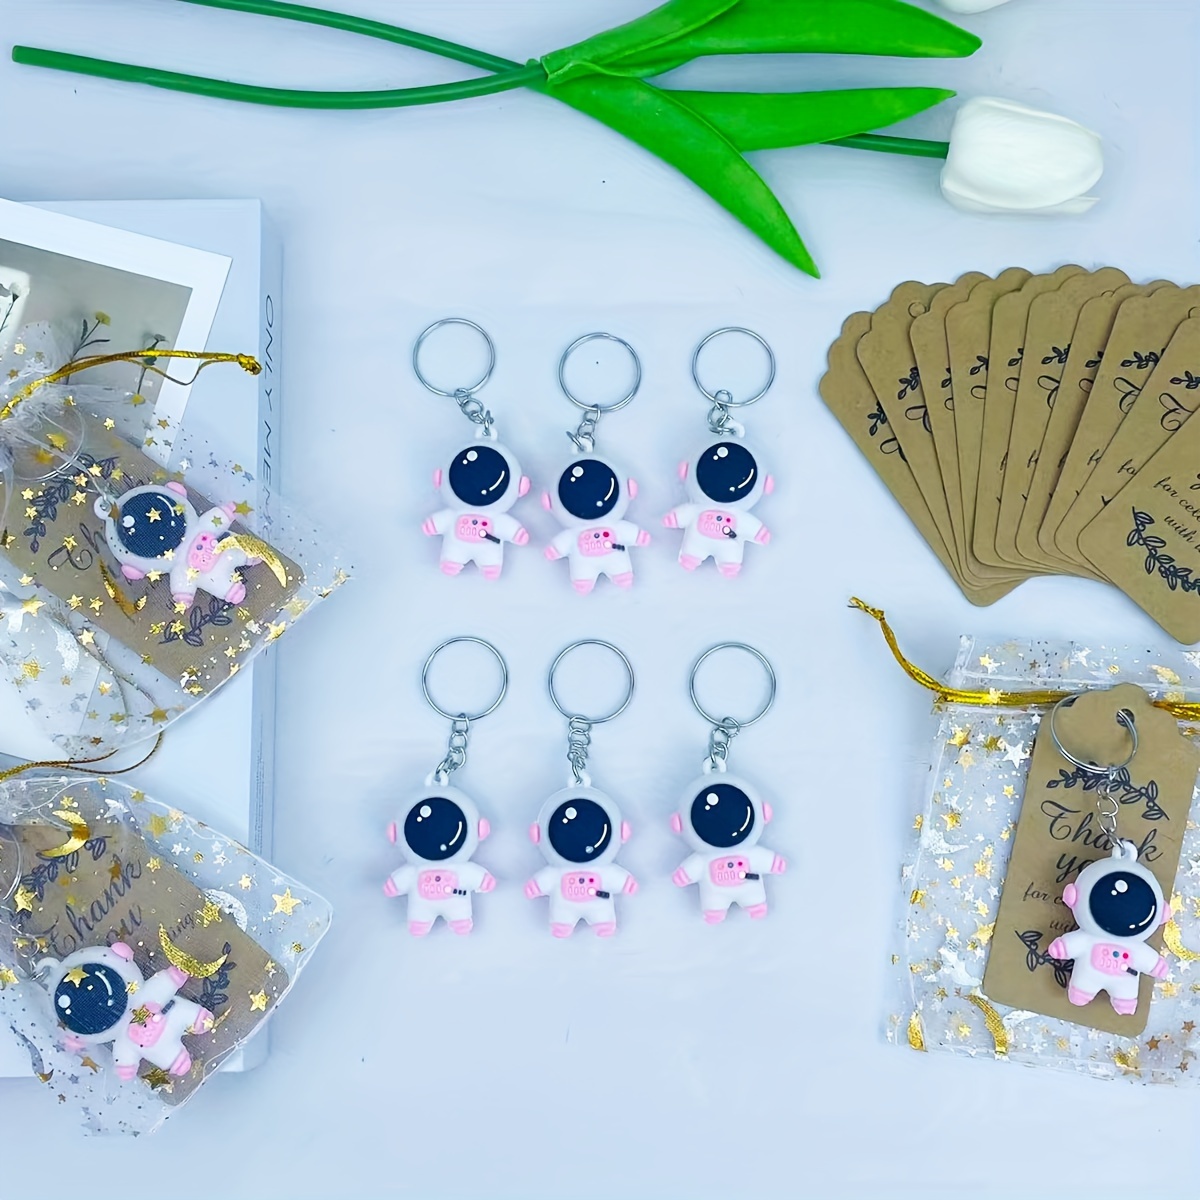 

Astronaut Keychain Set - Pvc Space Keyring Pack With Star Moon Organza Bag And Thank You Tags - Perfect For Party Favors, School Rewards, Birthday, Wedding, Couples Gifts (10pcs Pink Or 15pcs Blue)